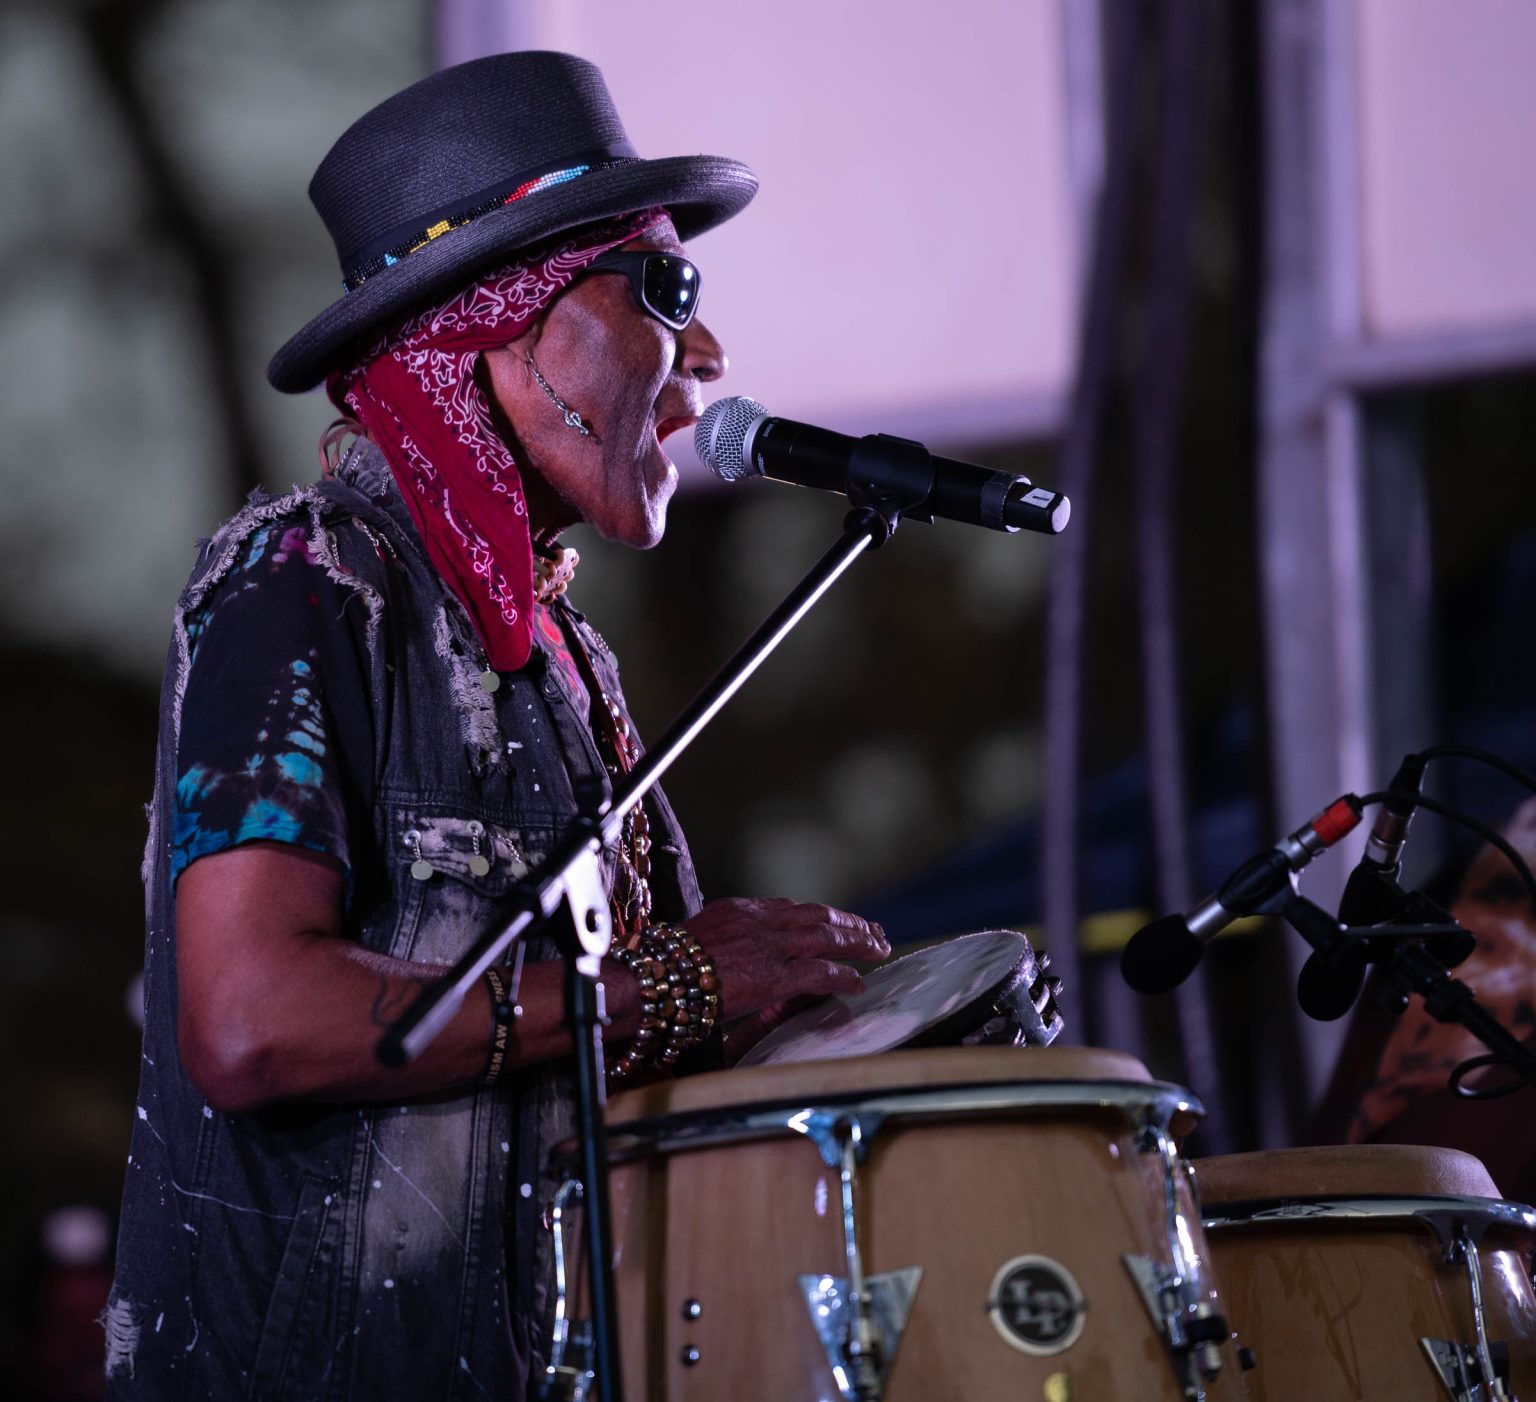 2022 Congo Square Rhythms Festival, Cyril Neville featuring Omari Neville & the Fuel, Music, New Orleans